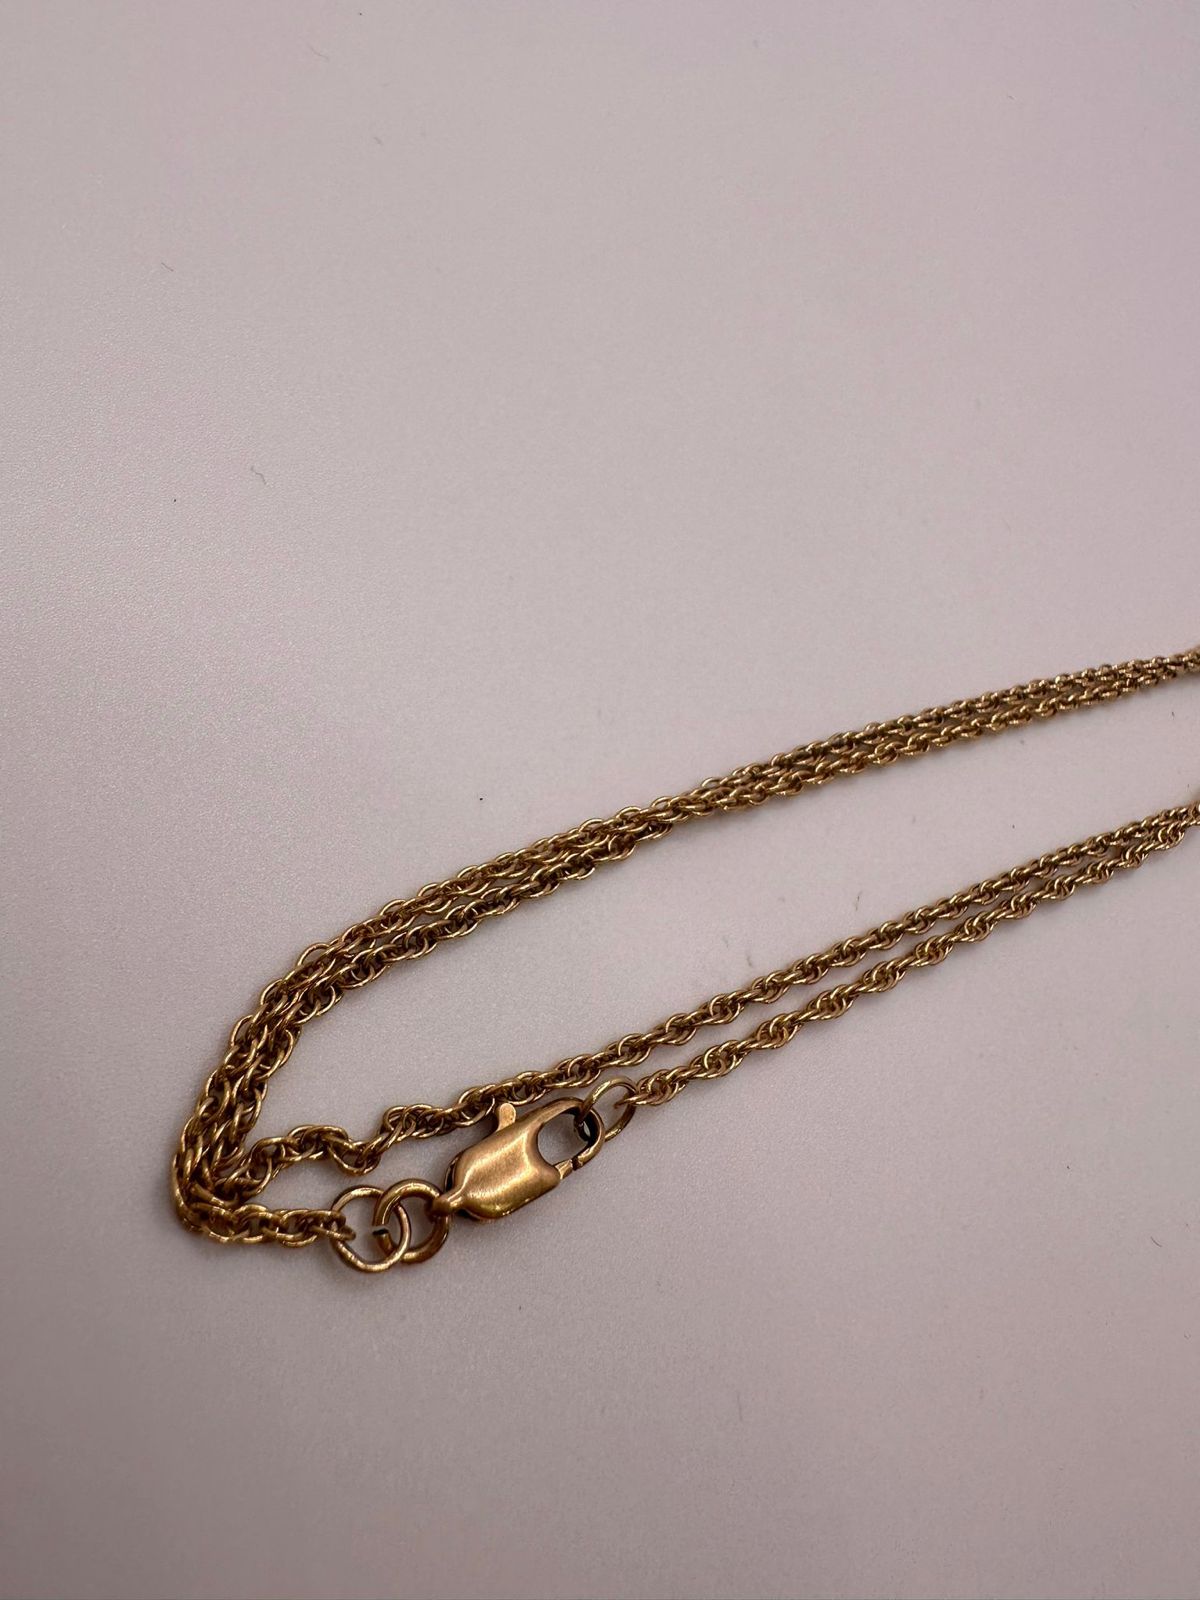 9ct gold chain - Image 2 of 2